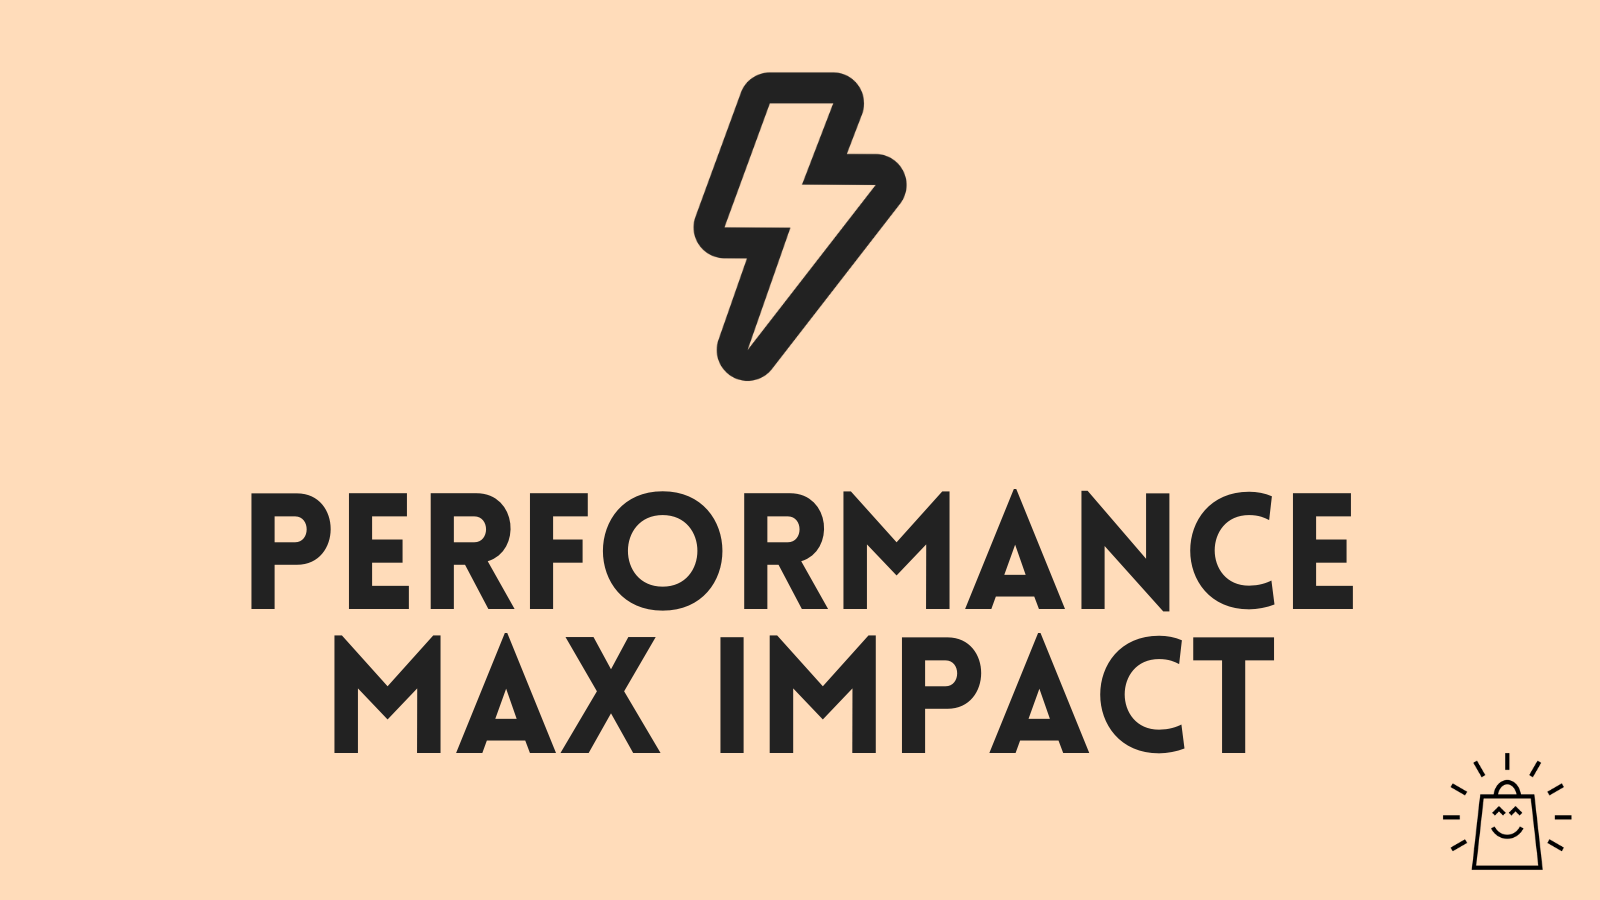 Dennis Moons (Store Growers) – Performance Max Impact